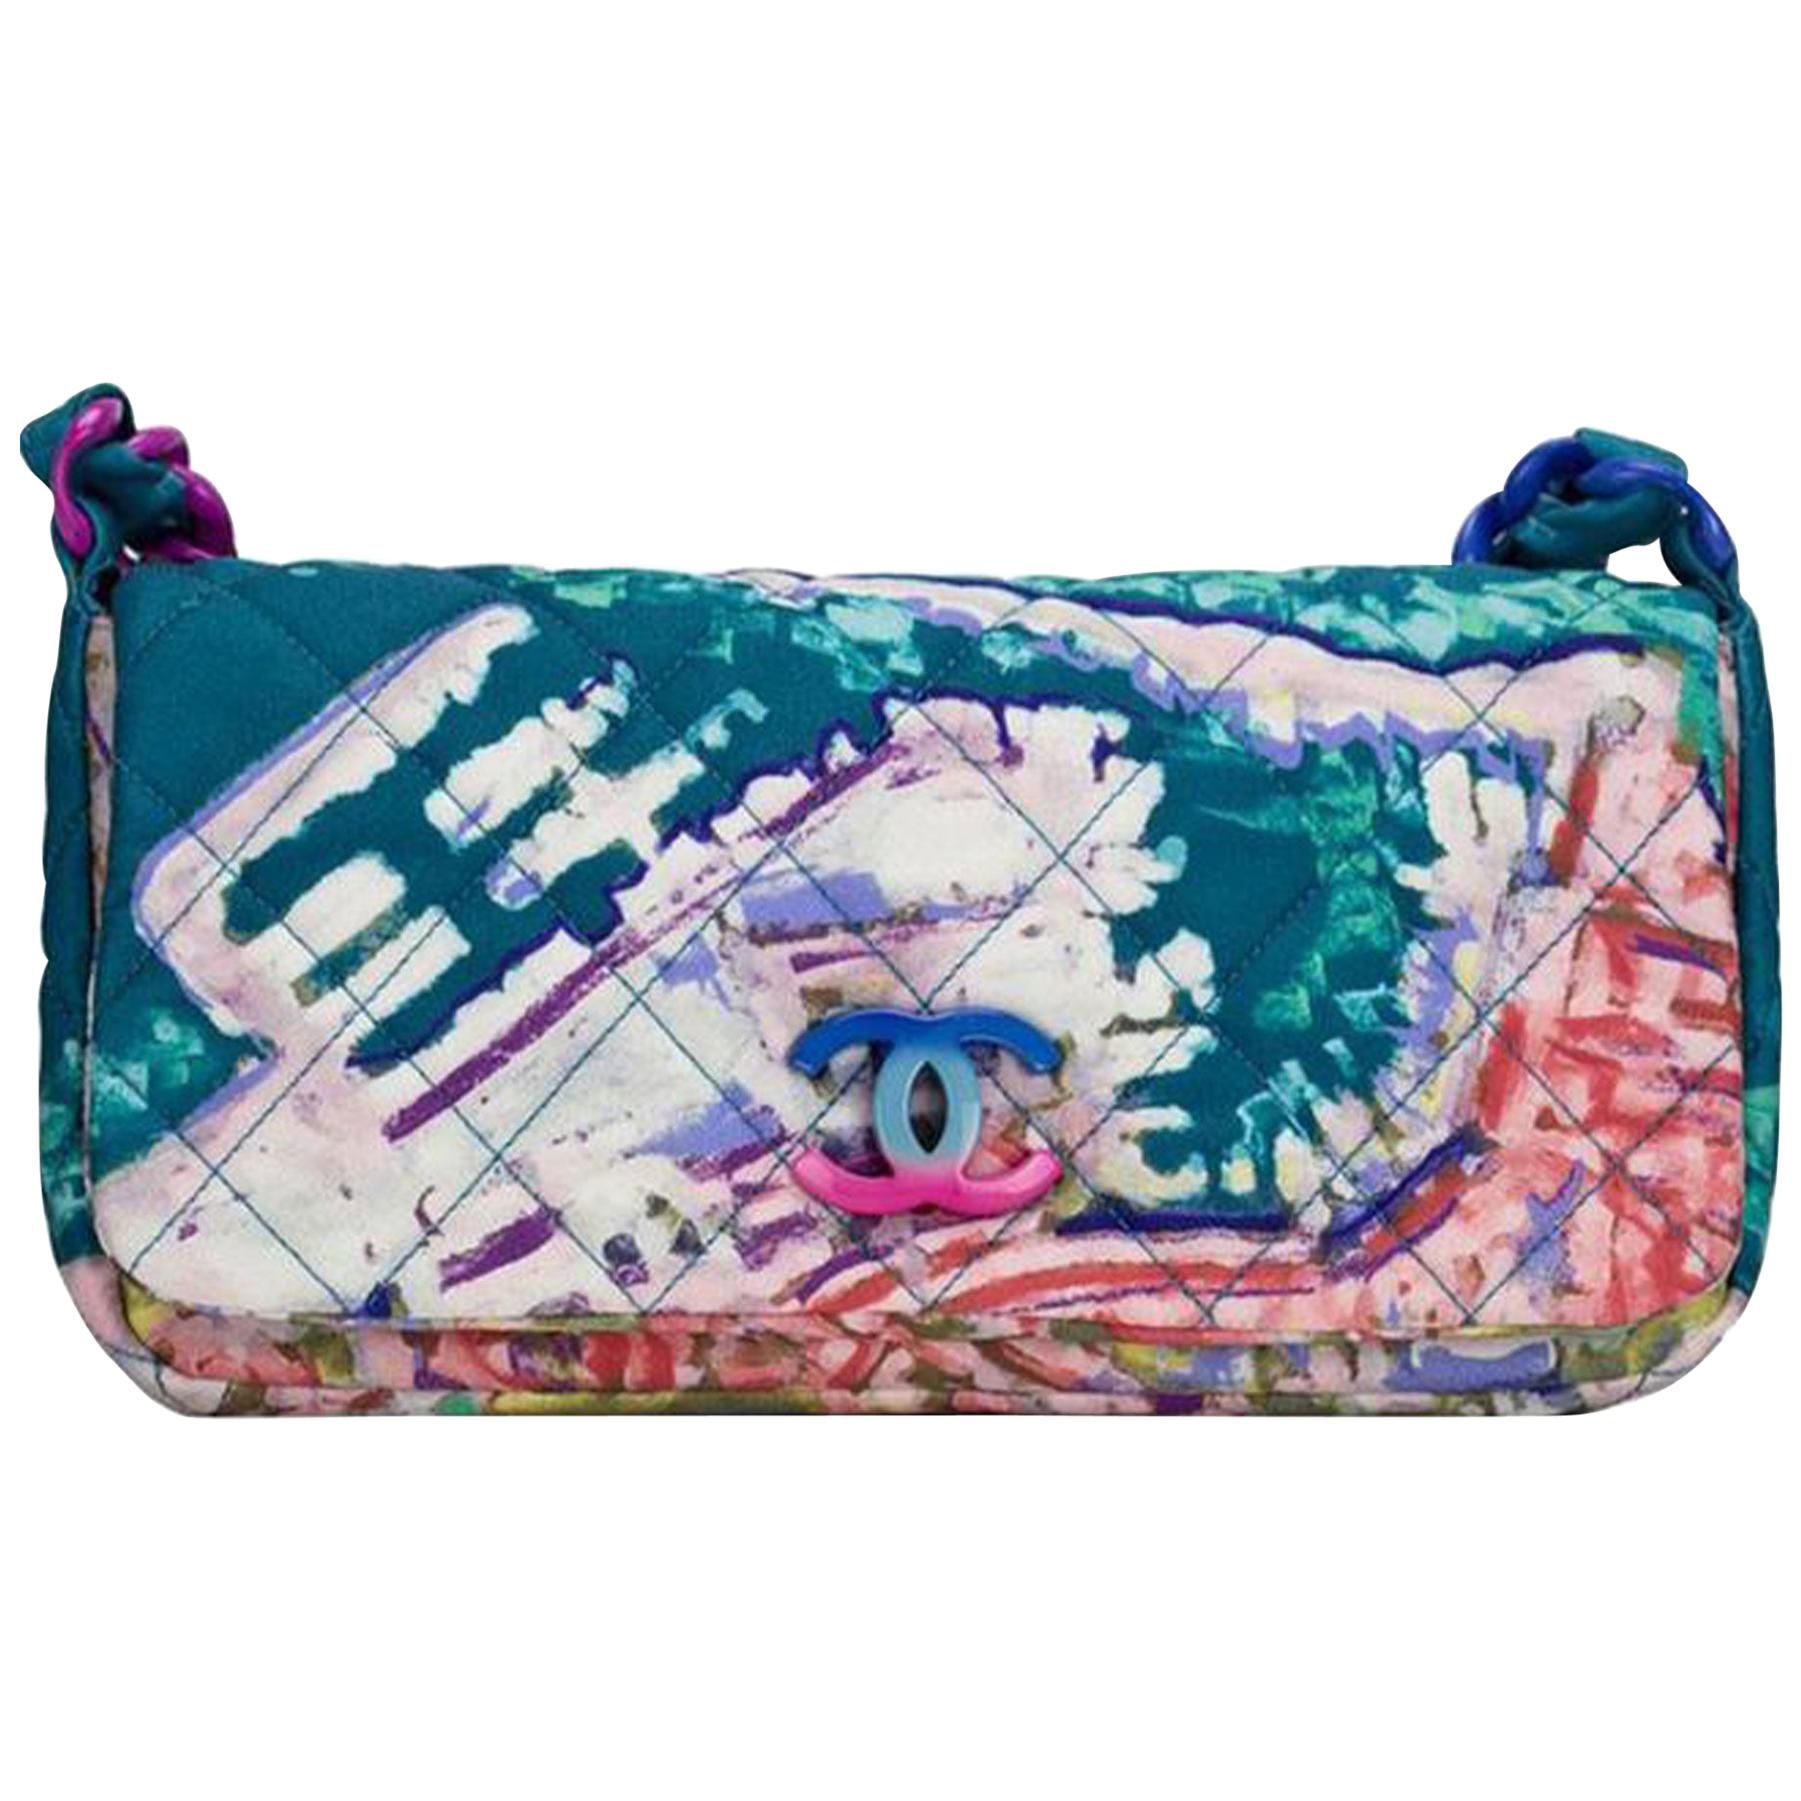 Chanel Bag with Top Handle Classic Flap Graffiti Watercolor